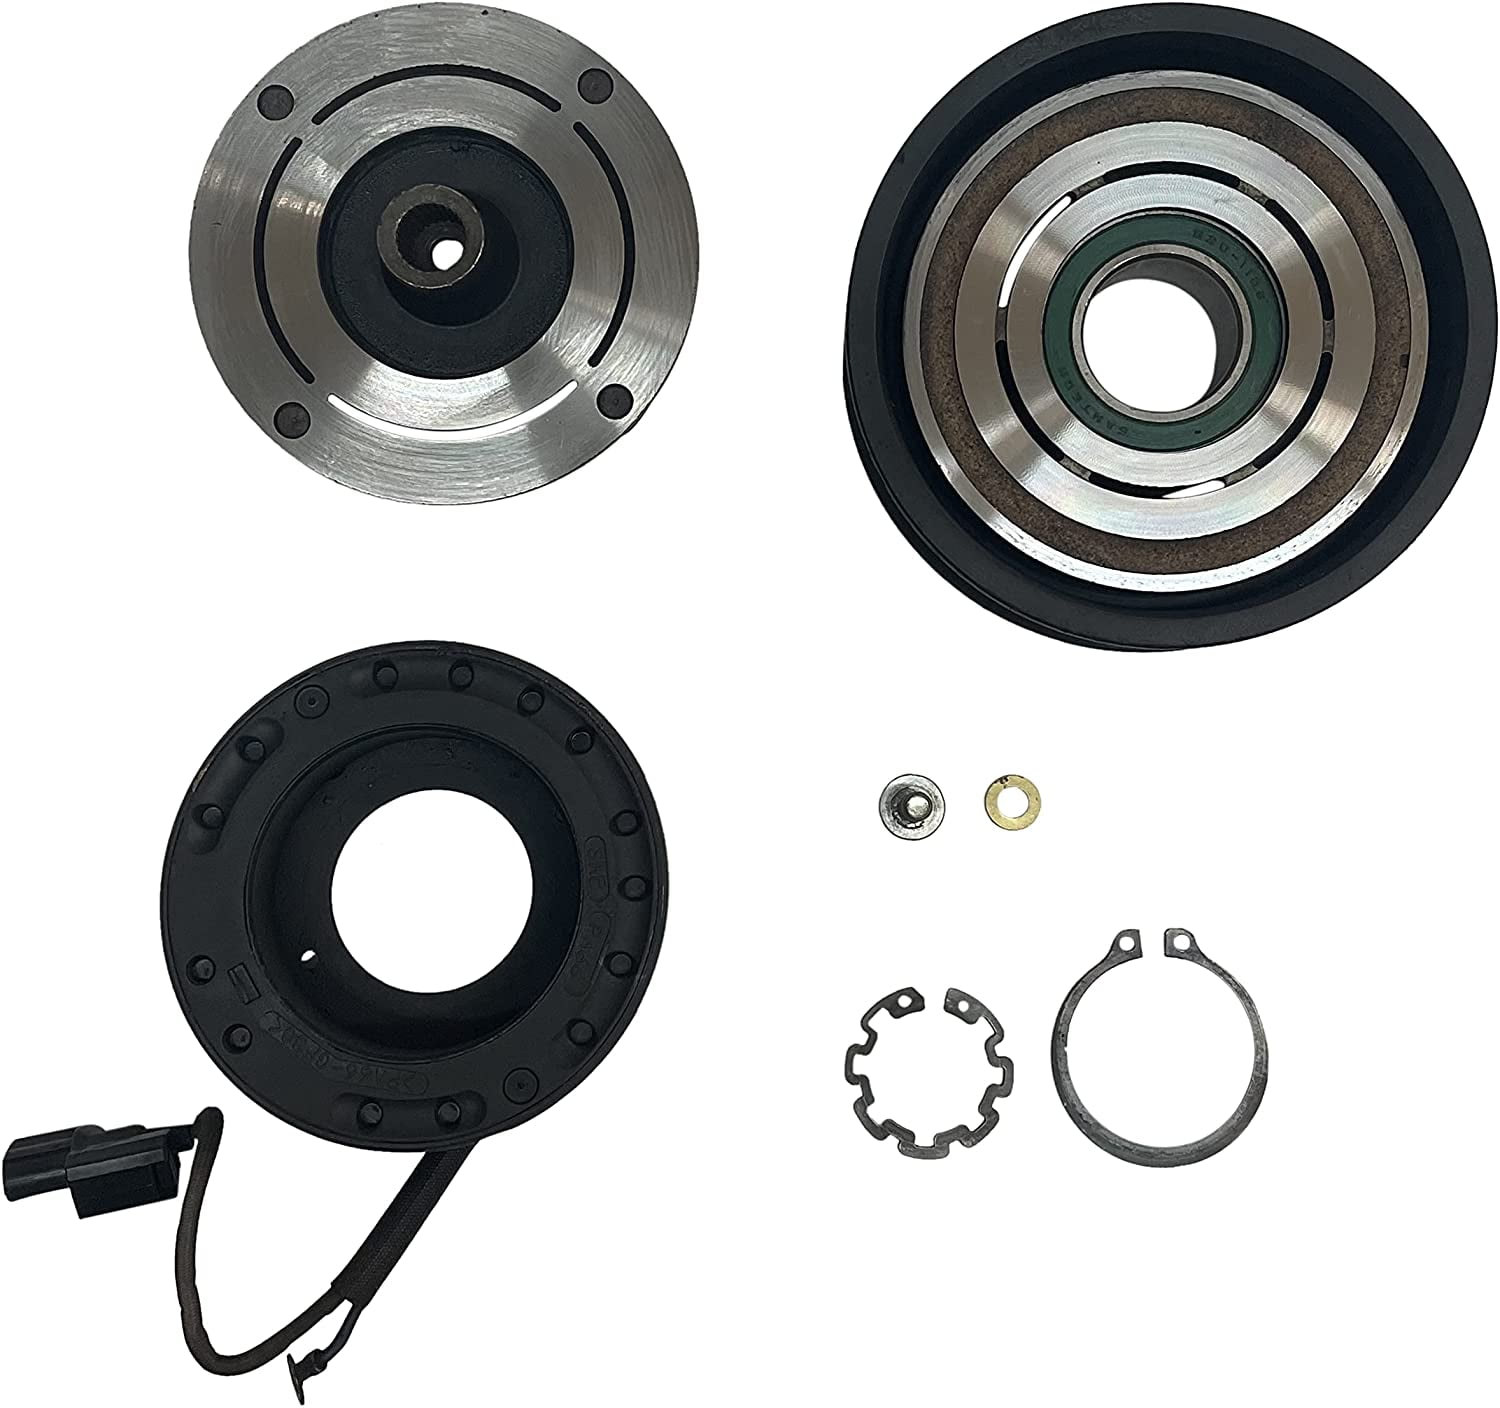 A/C Compressor Clutch Assembly Kit Pulley Coil Plate Replacement for 2003-2007 Honda Accord 3.0L,For 2005-2007 Honda Odyssey 3.5L,For 2003-2006 Acura MDX 3.5L 